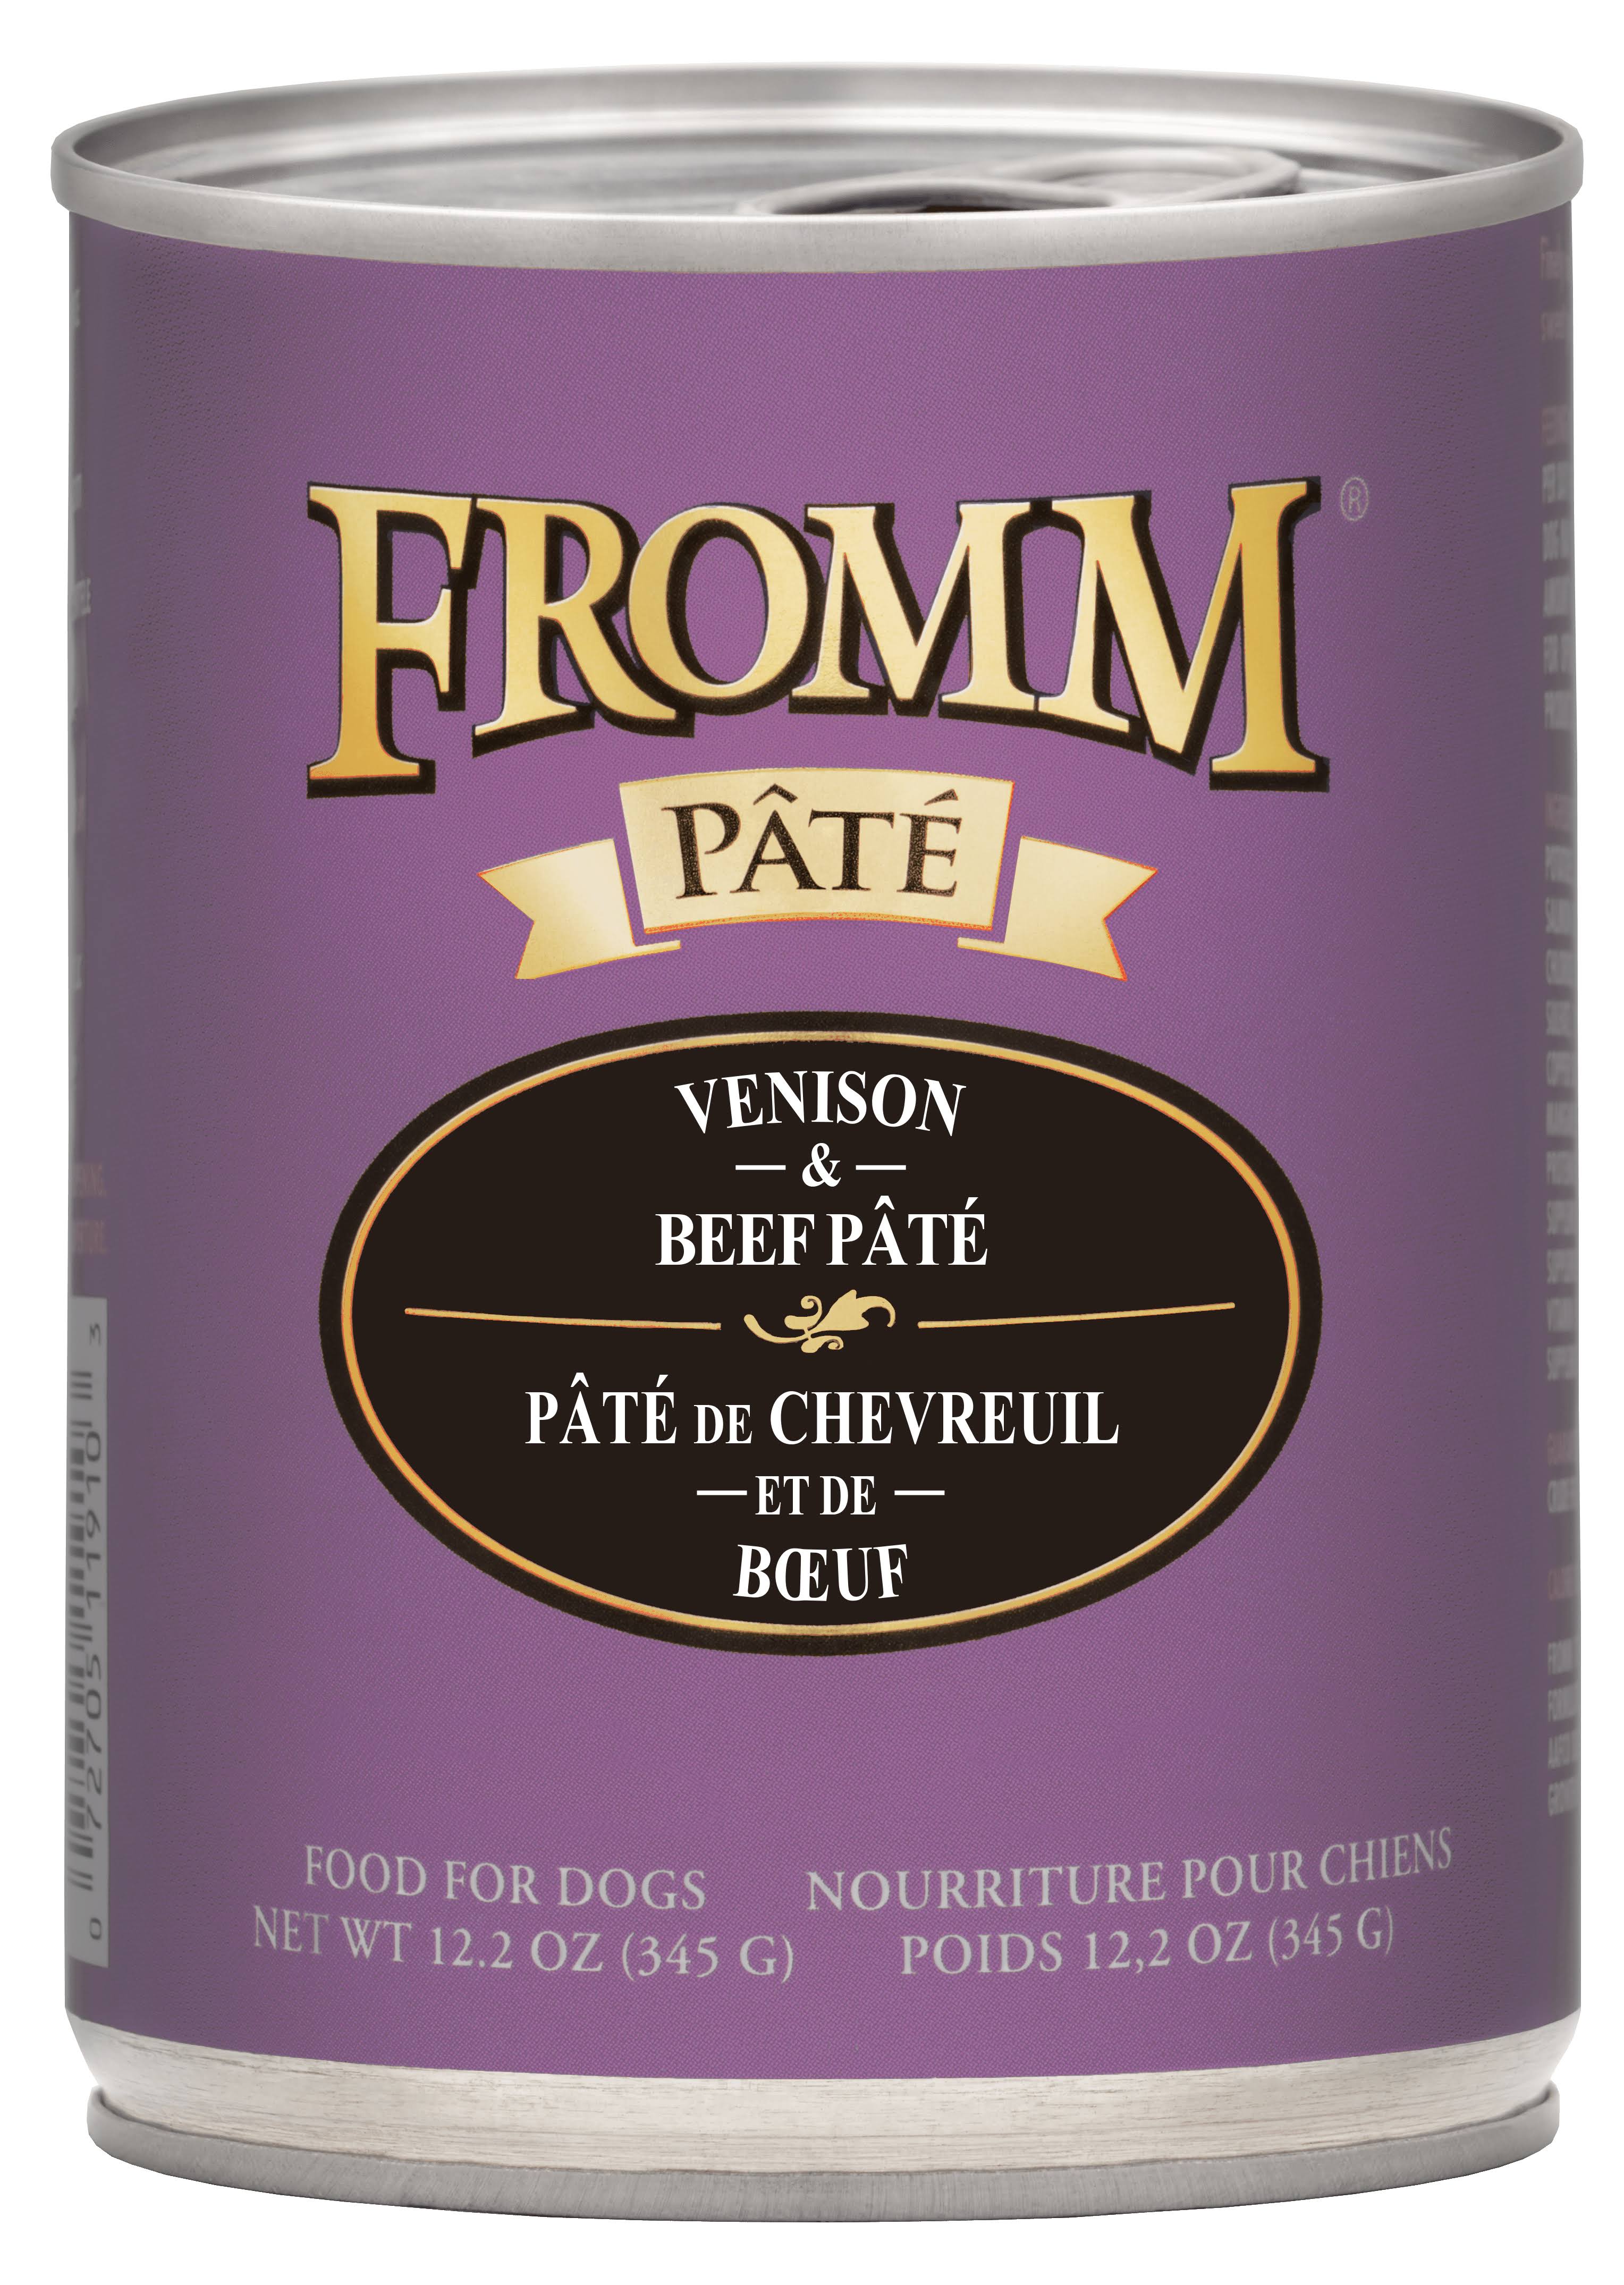 Fromm Gold Venison & Beef Pate Canned Dog Food 12oz